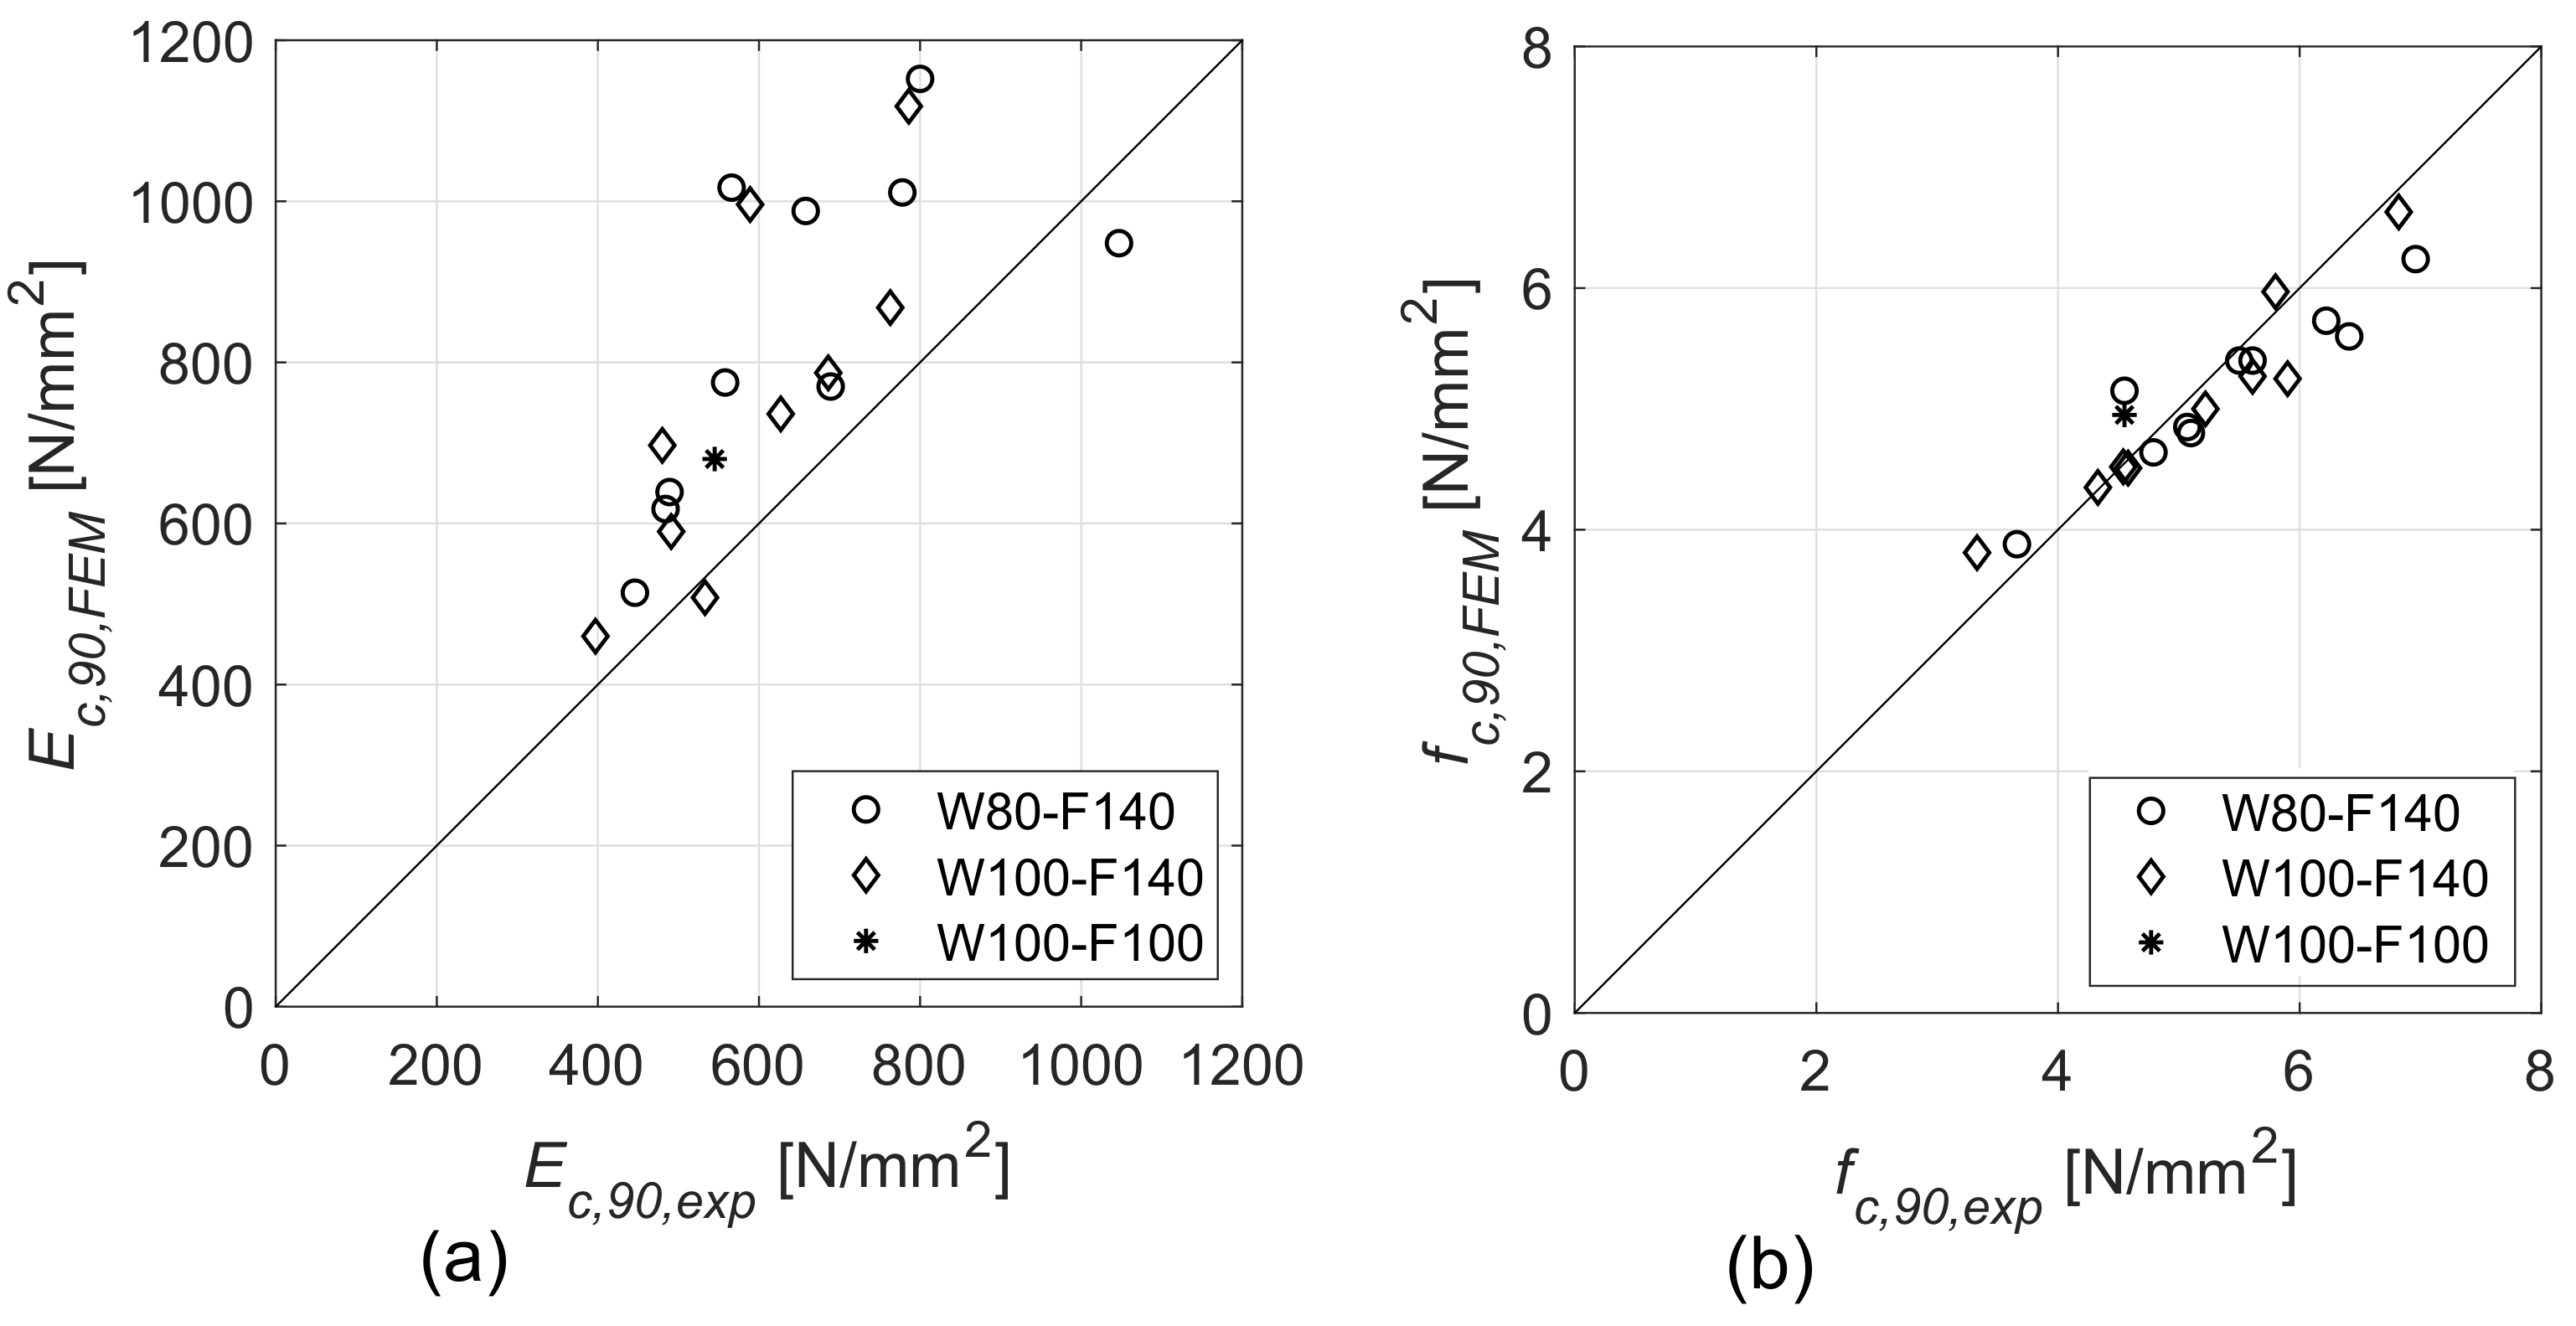 Full article: Moisture and short-term time-dependent behavior of Norway  spruce clear wood under compression perpendicular to the grain and rolling  shear